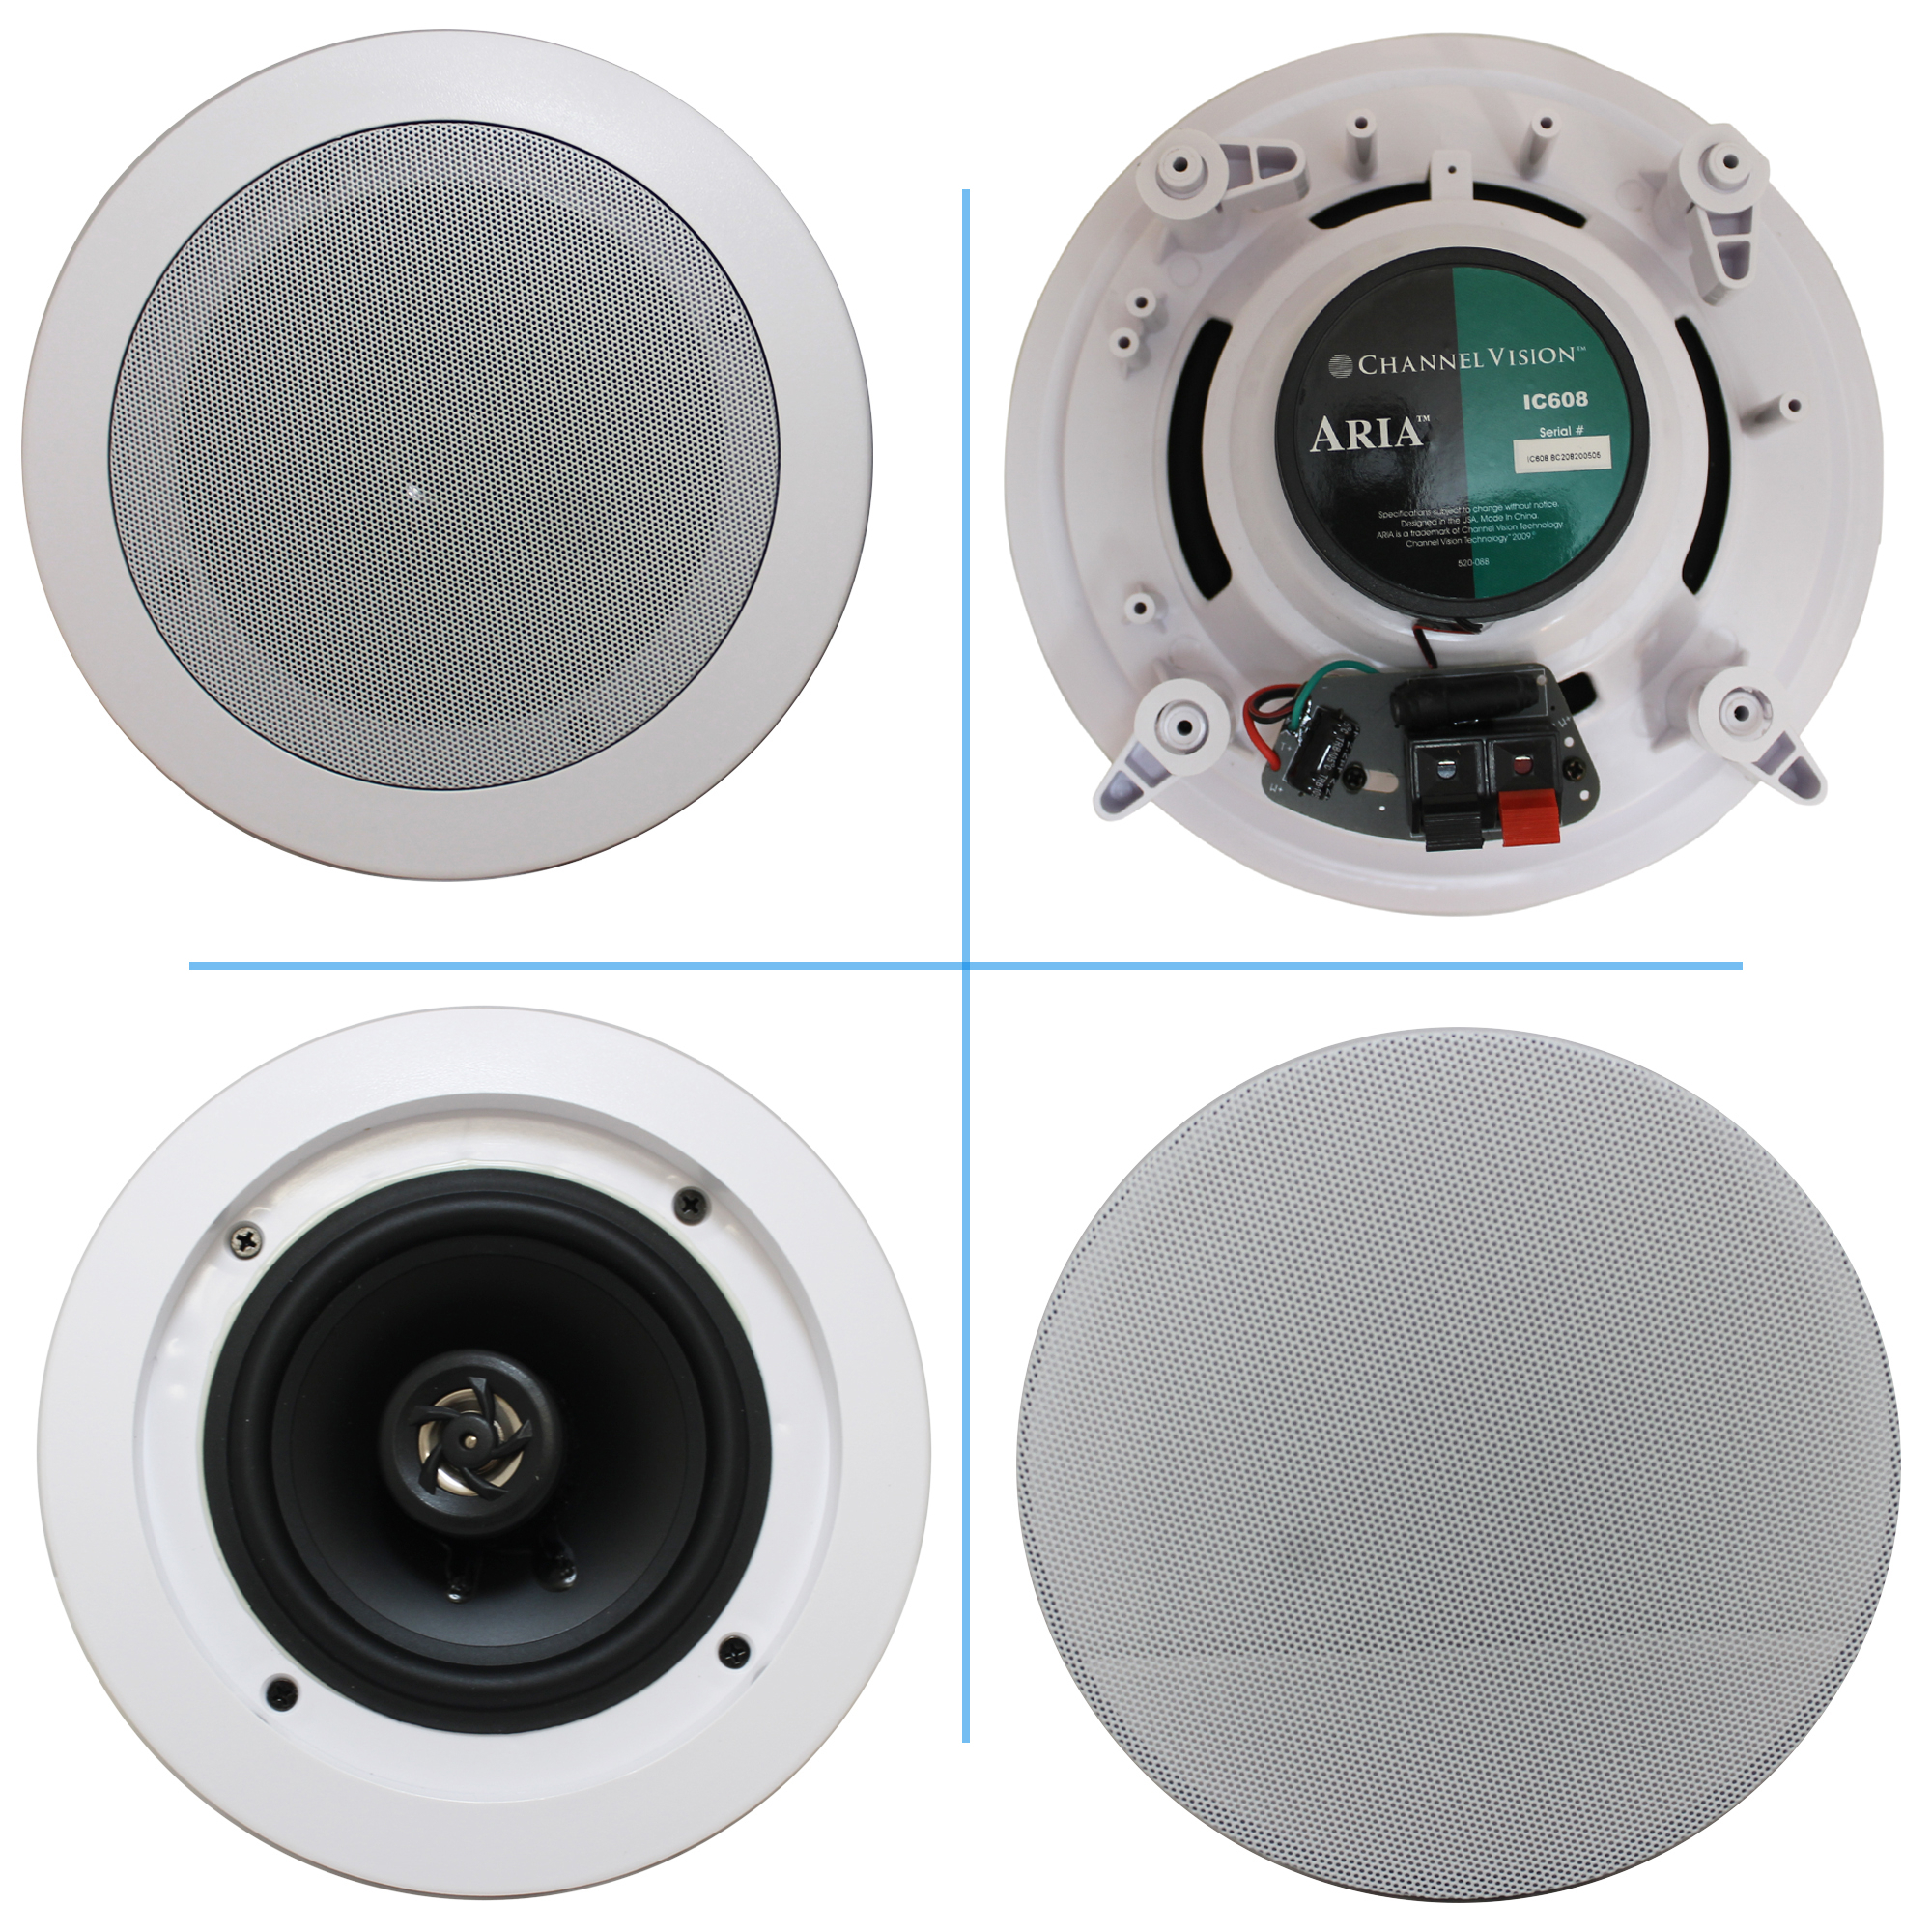 Pair Of 2-Way Stereo Sound 6.5'' Ceiling - Wall Mount Speakers With Woofer/Tweeter Flush Design Easy Installation